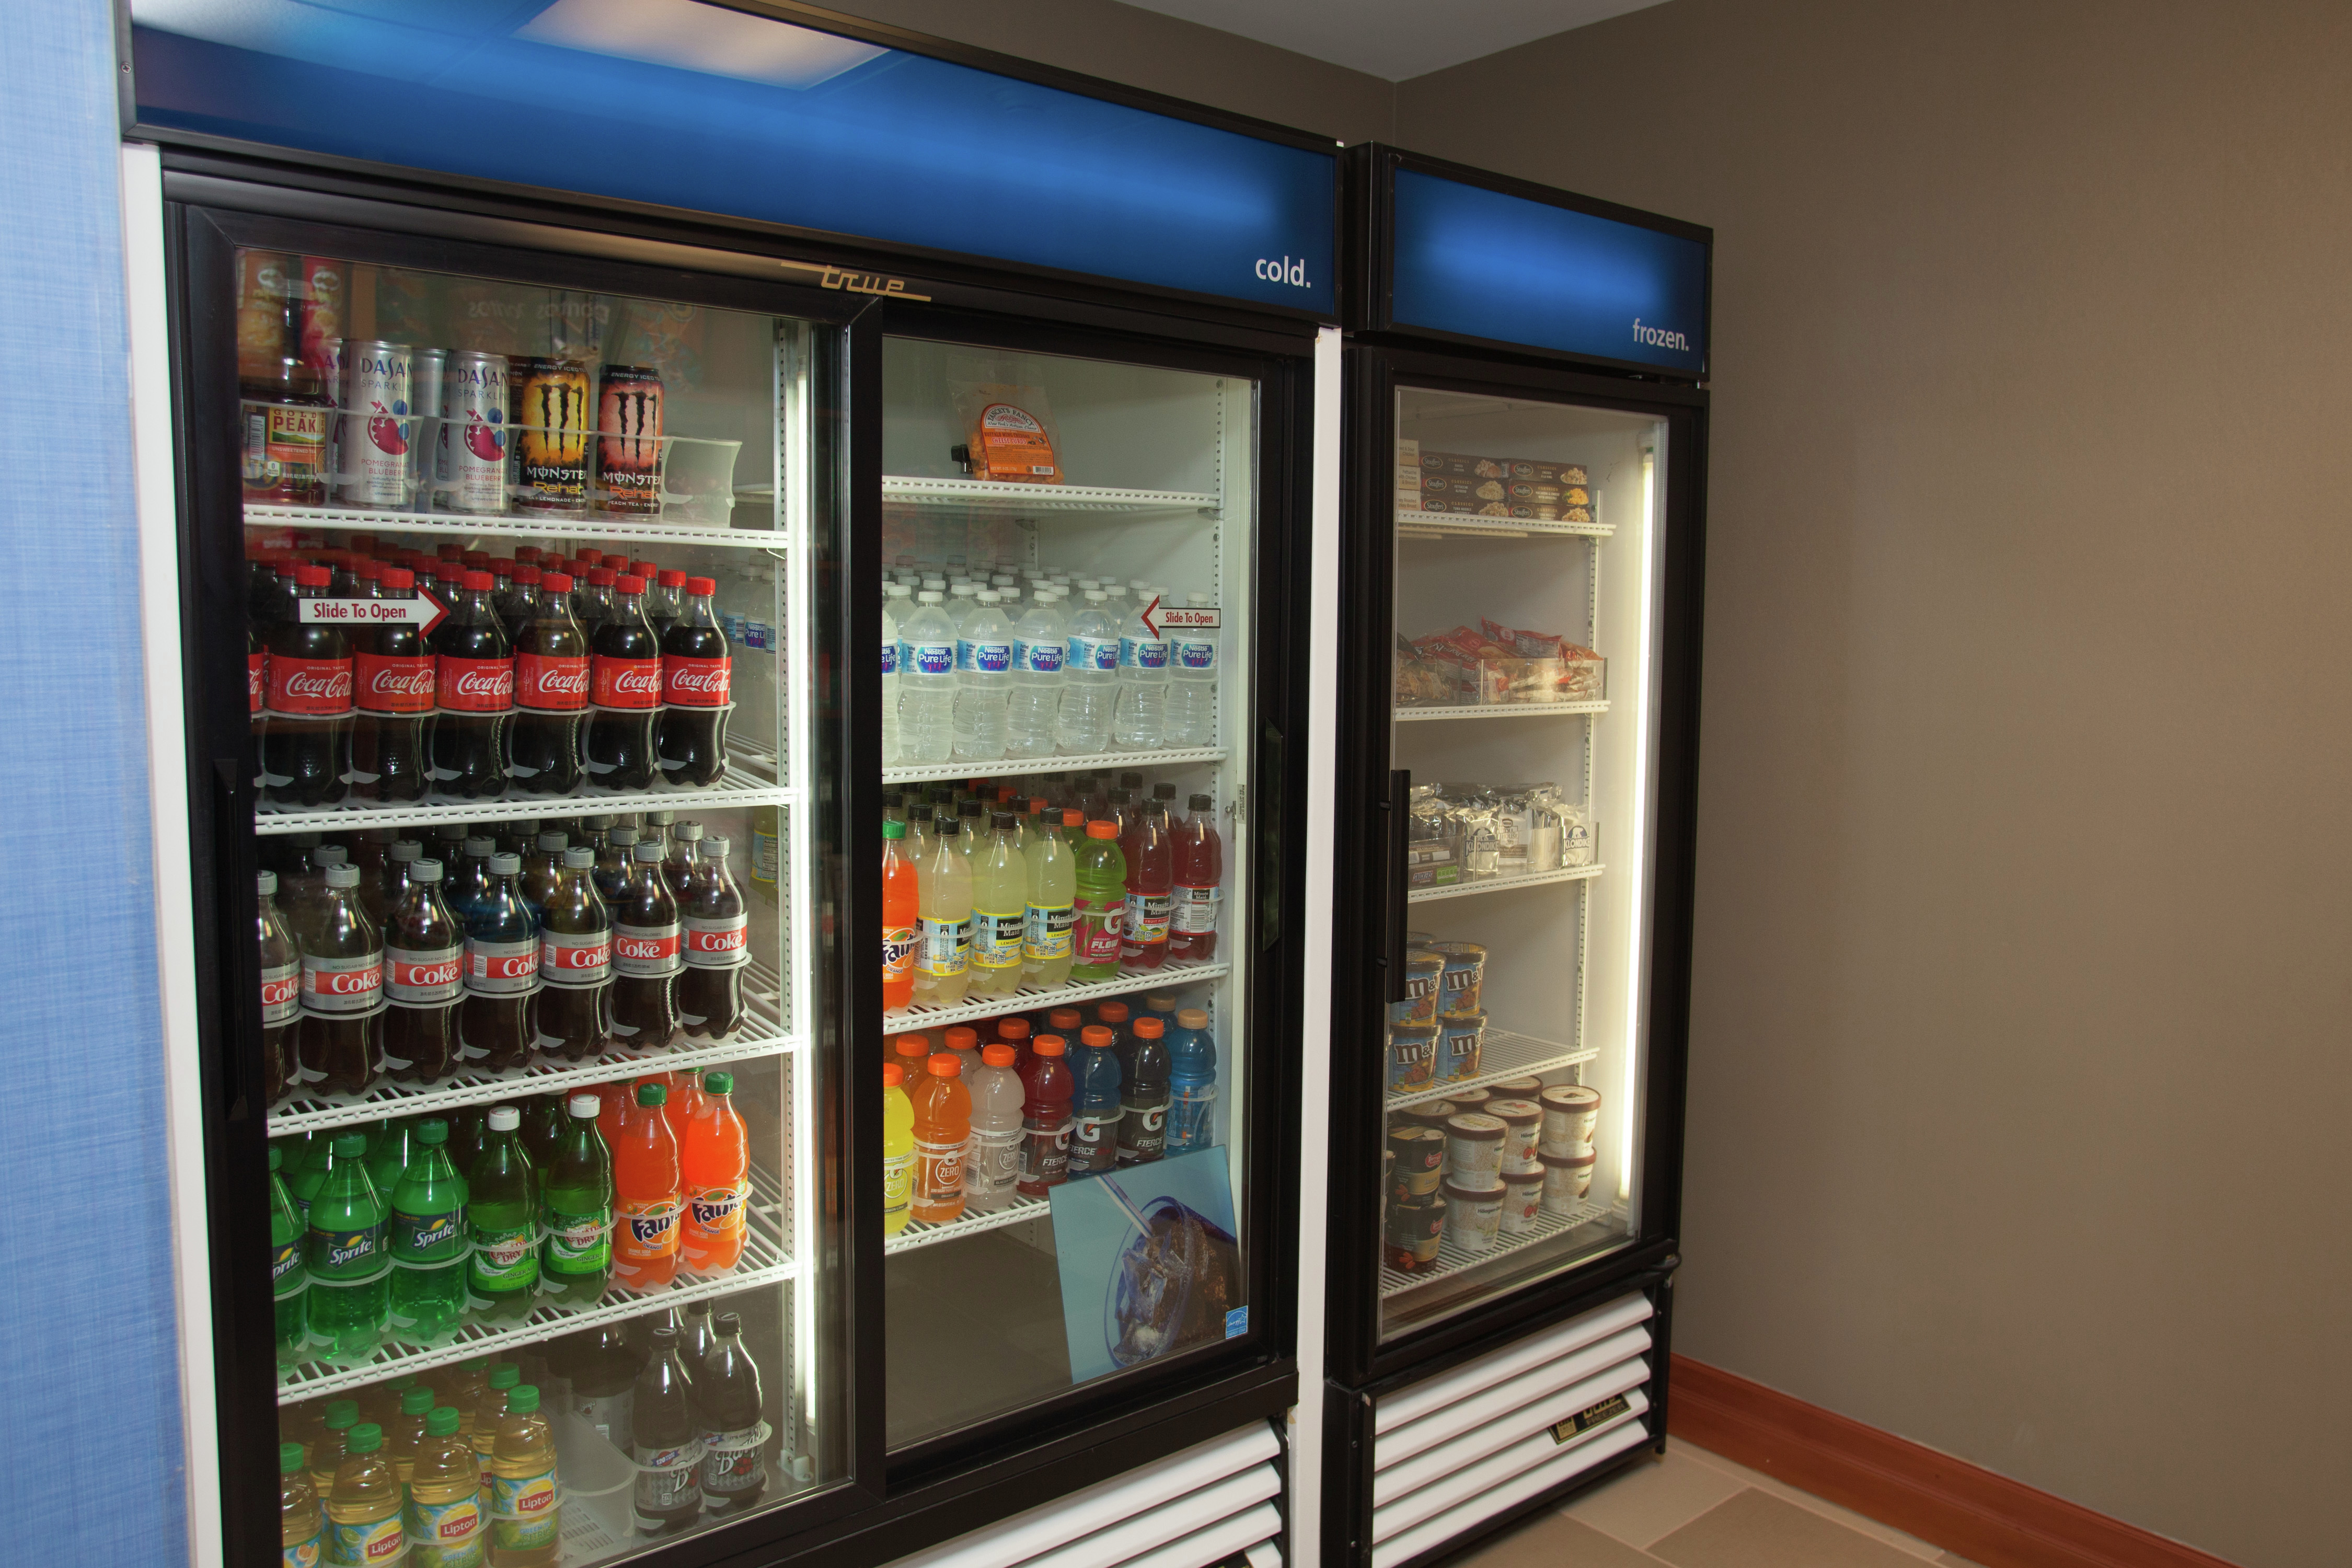 Refrigerated Beverages and Snacks in 24-Hour Snack Shop